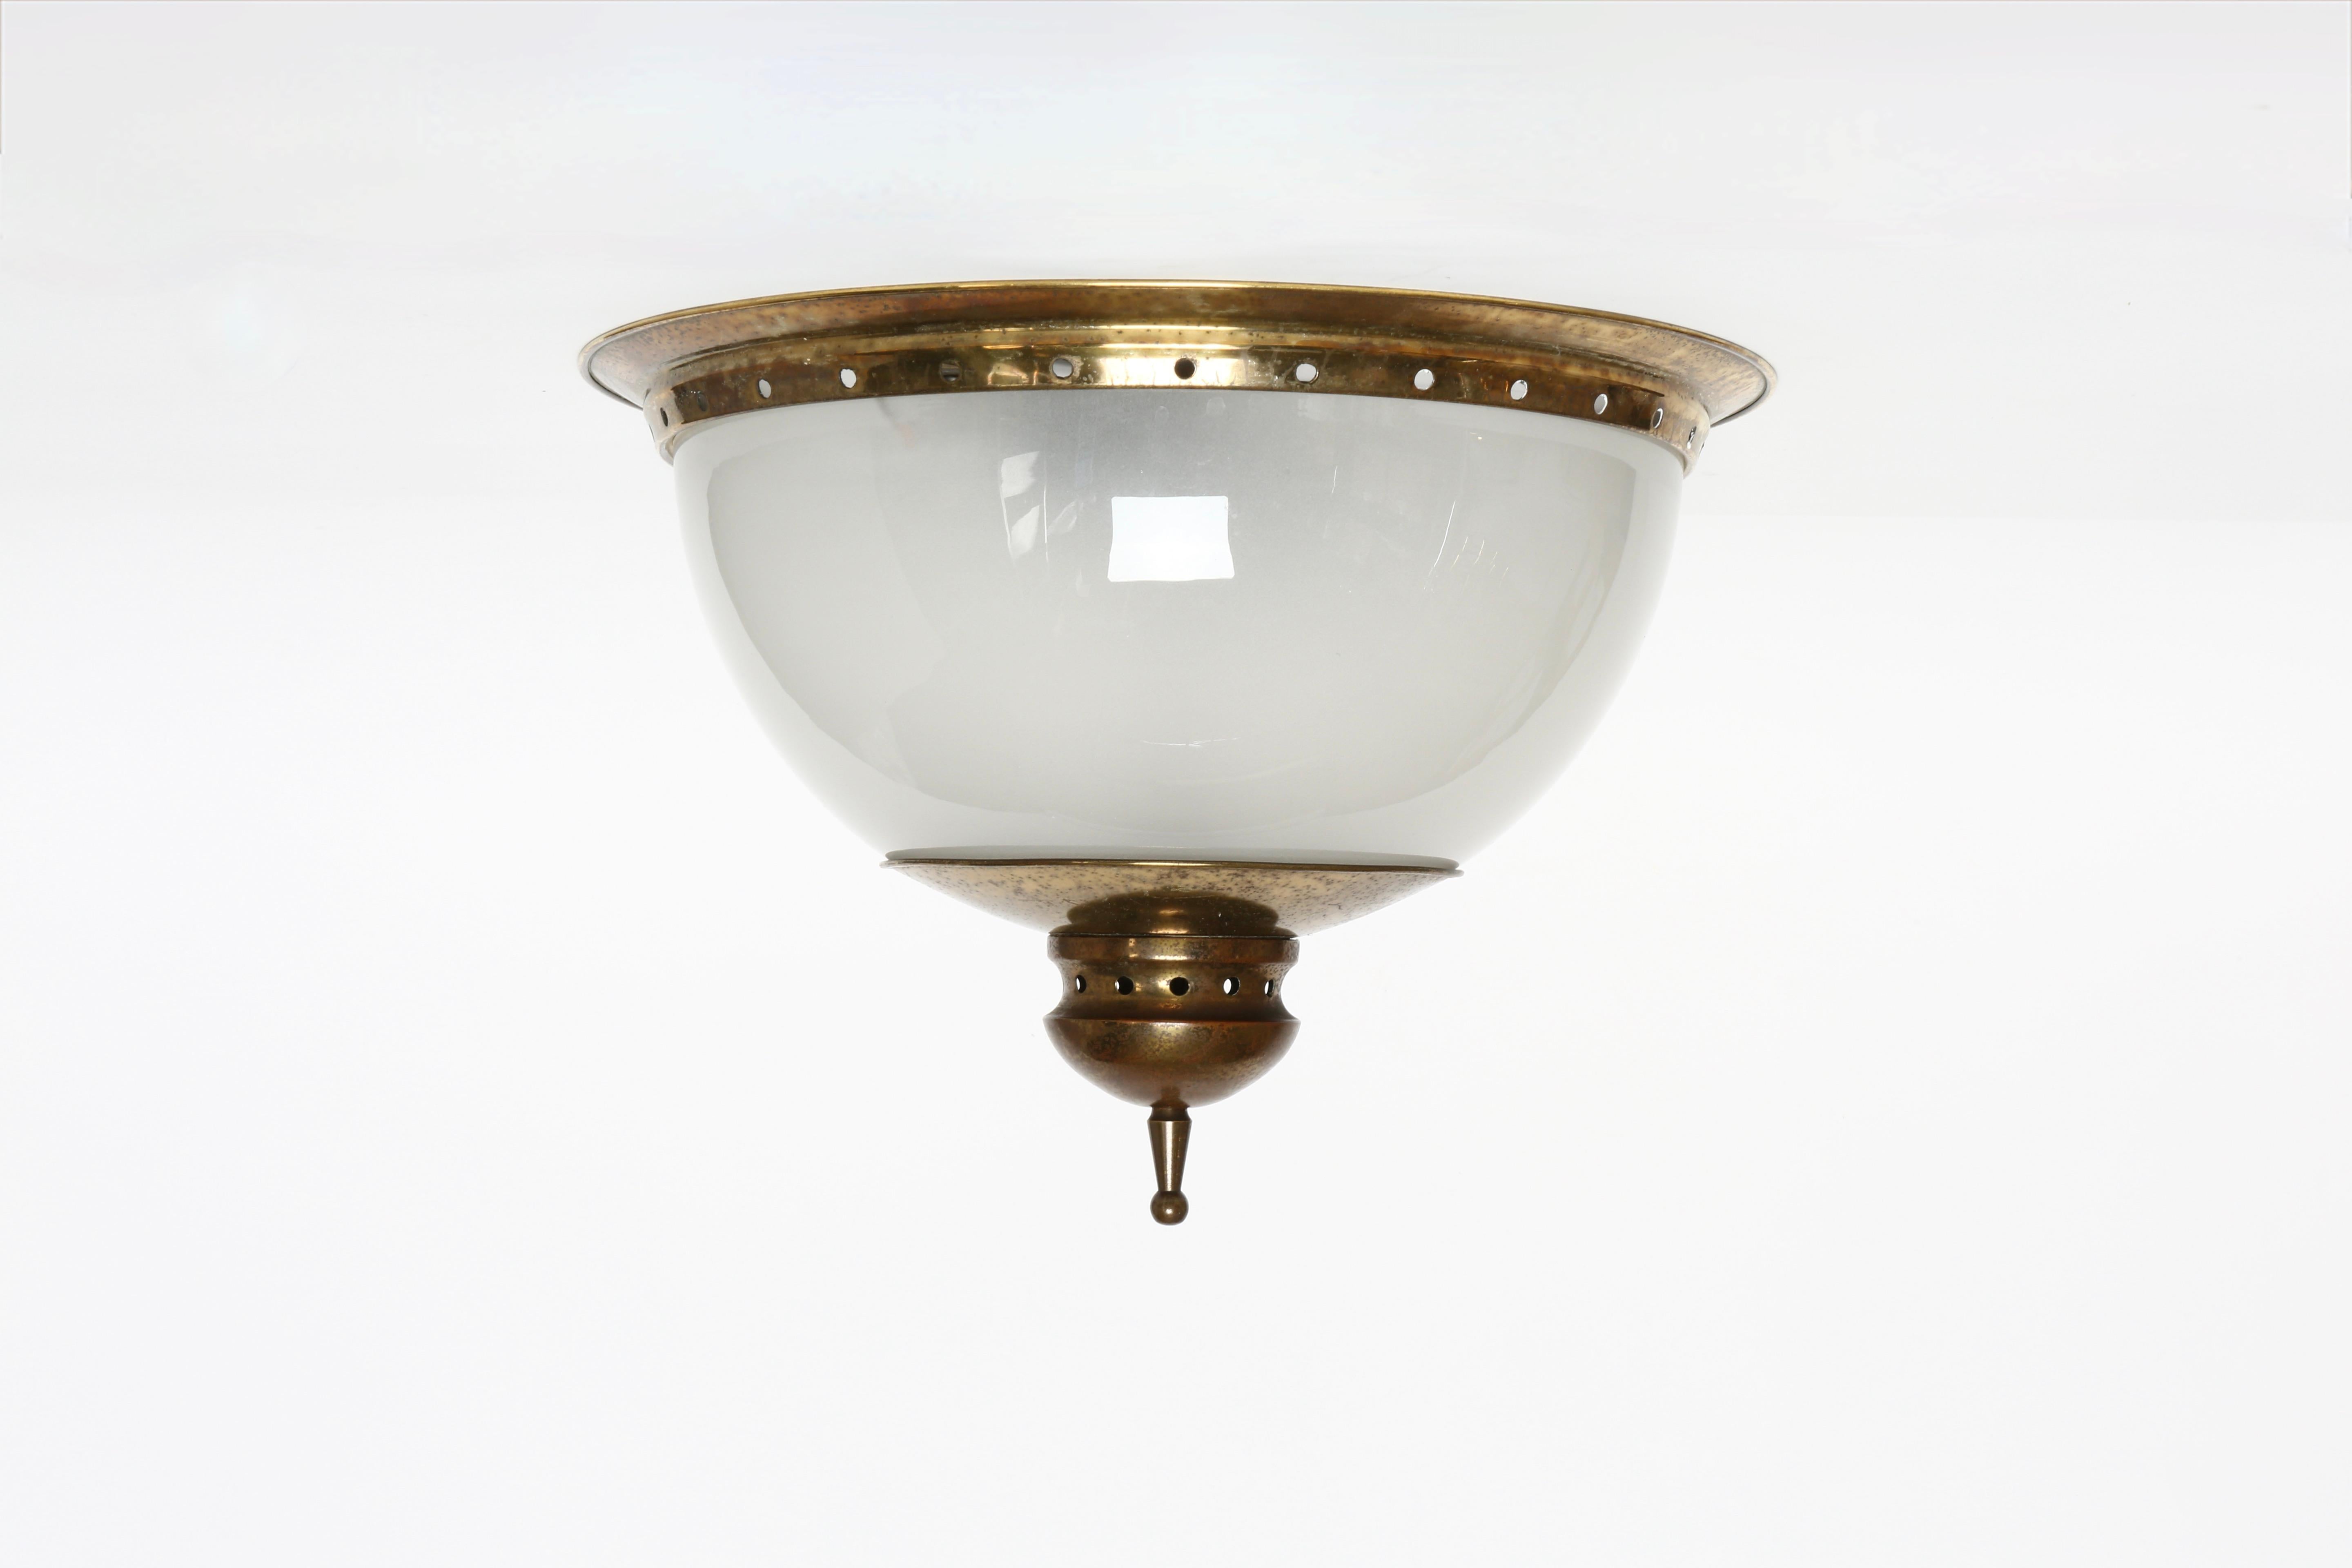 Luigi Caccia Dominioni for Azucena wall or ceiling light
Made in Italy, 1960s
Opalescent glass, brass
Takes 2 medium base bulbs
Complimentary US rewiring upon request
Price is for 1 light
3 lights are available.

We take pride in bringing vintage